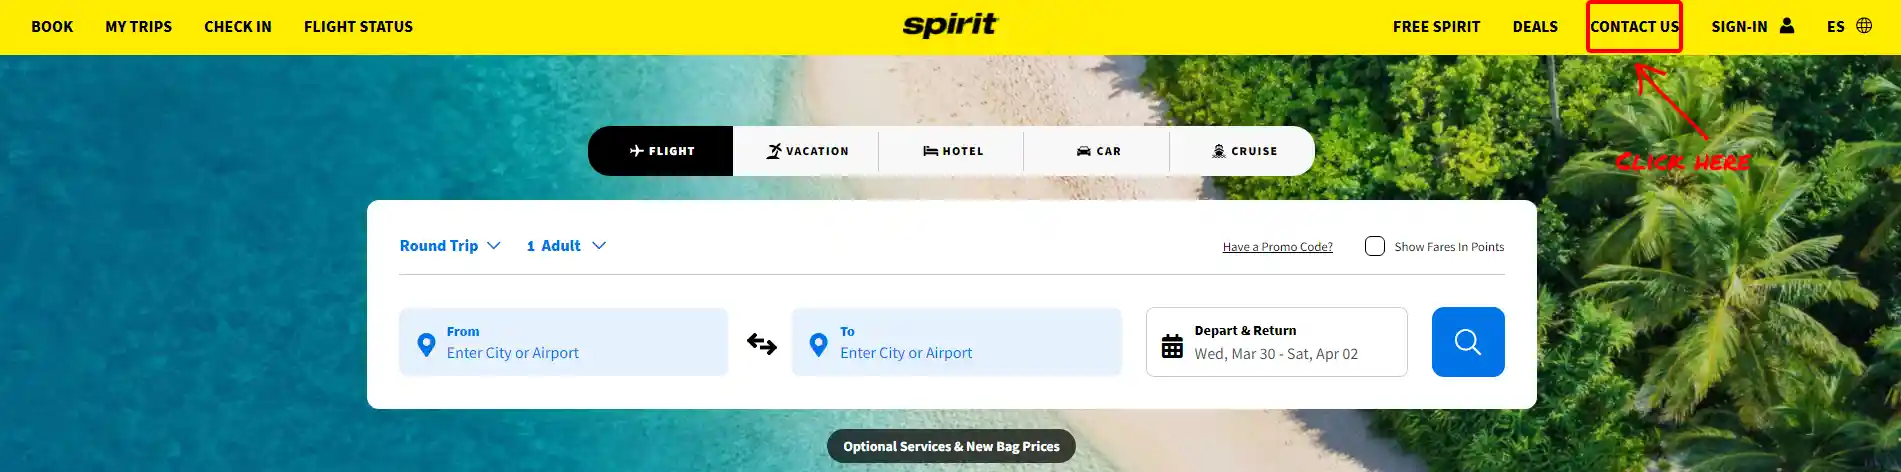 Spirit Airlines Contact Us